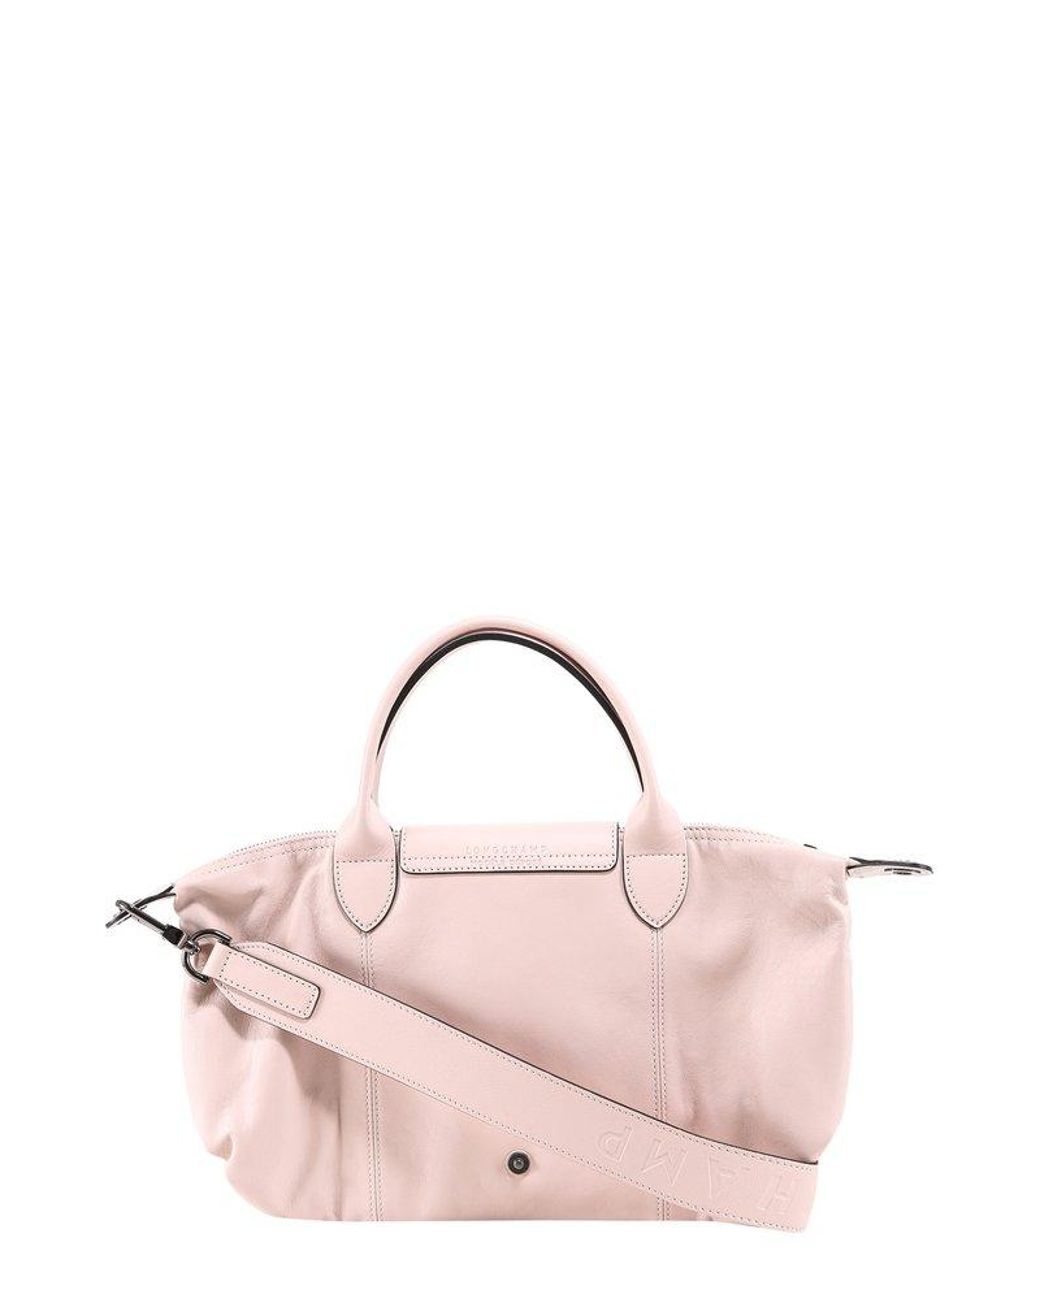 Longchamp Le Pliage Cuir Small Top Handle Bag in Pink | Lyst